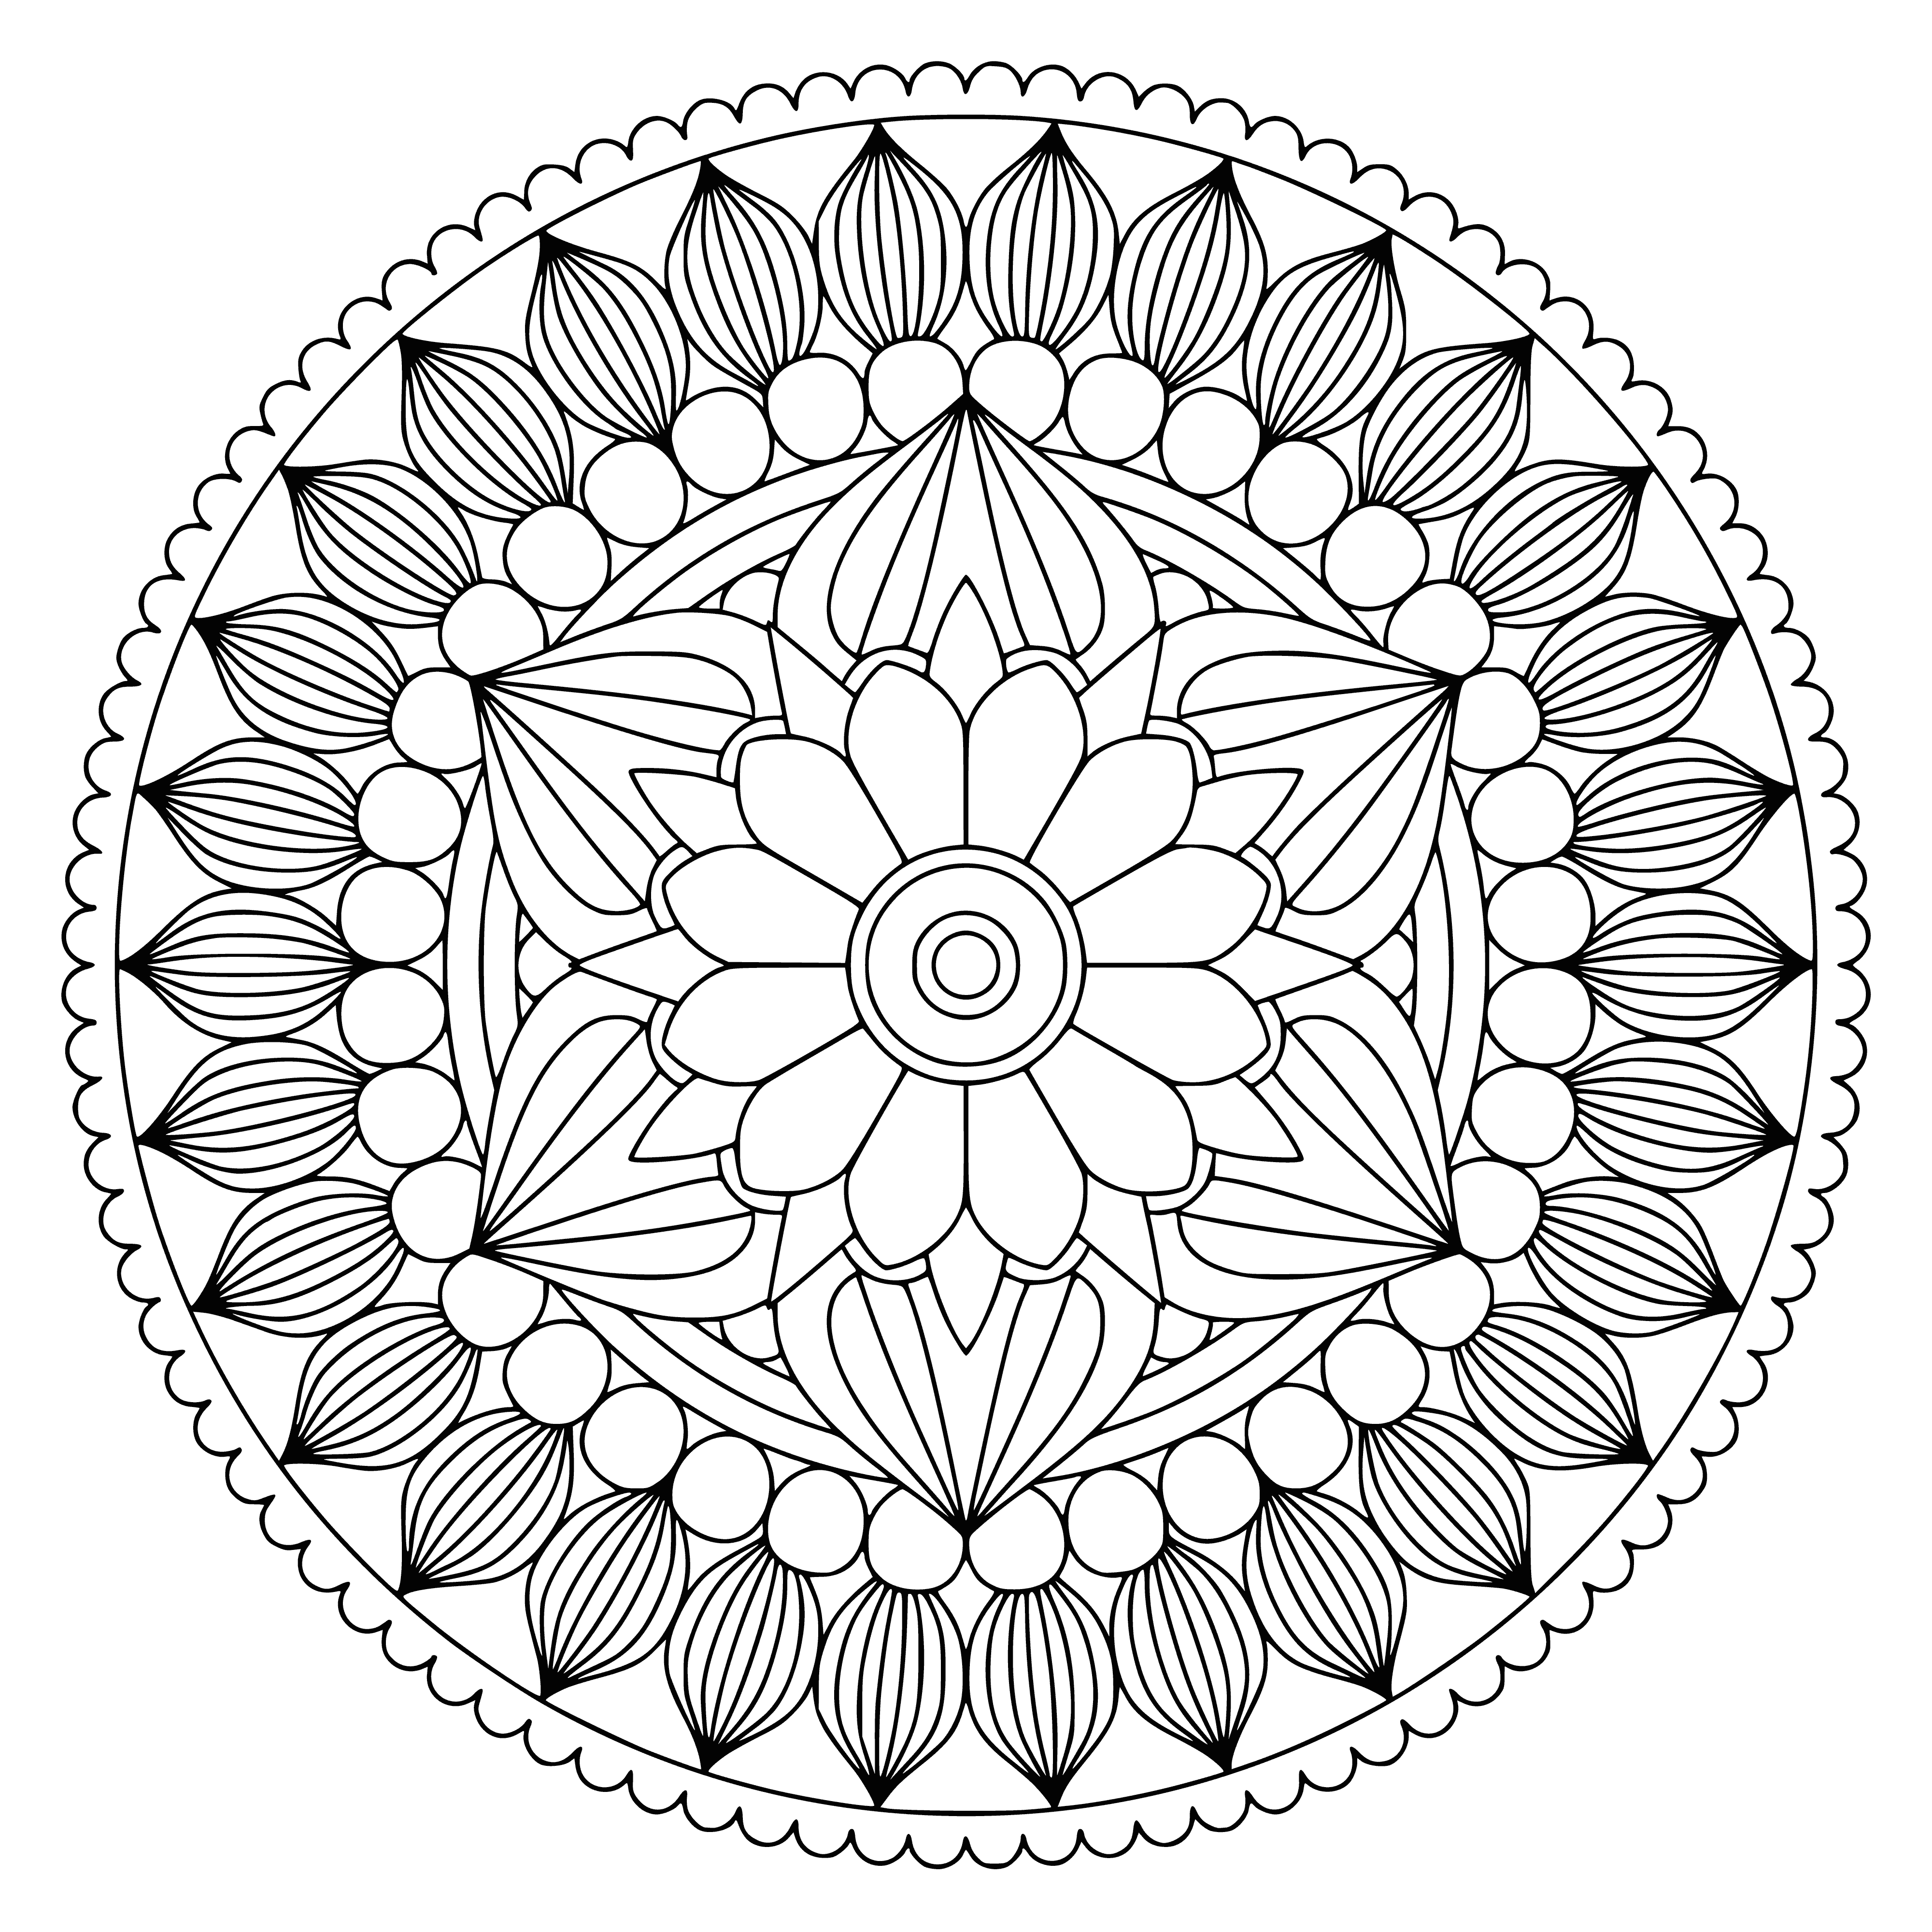 coloring page: Color intricate flower mandala! Roses, daisies, and more, this complex design will help you relax and destress.